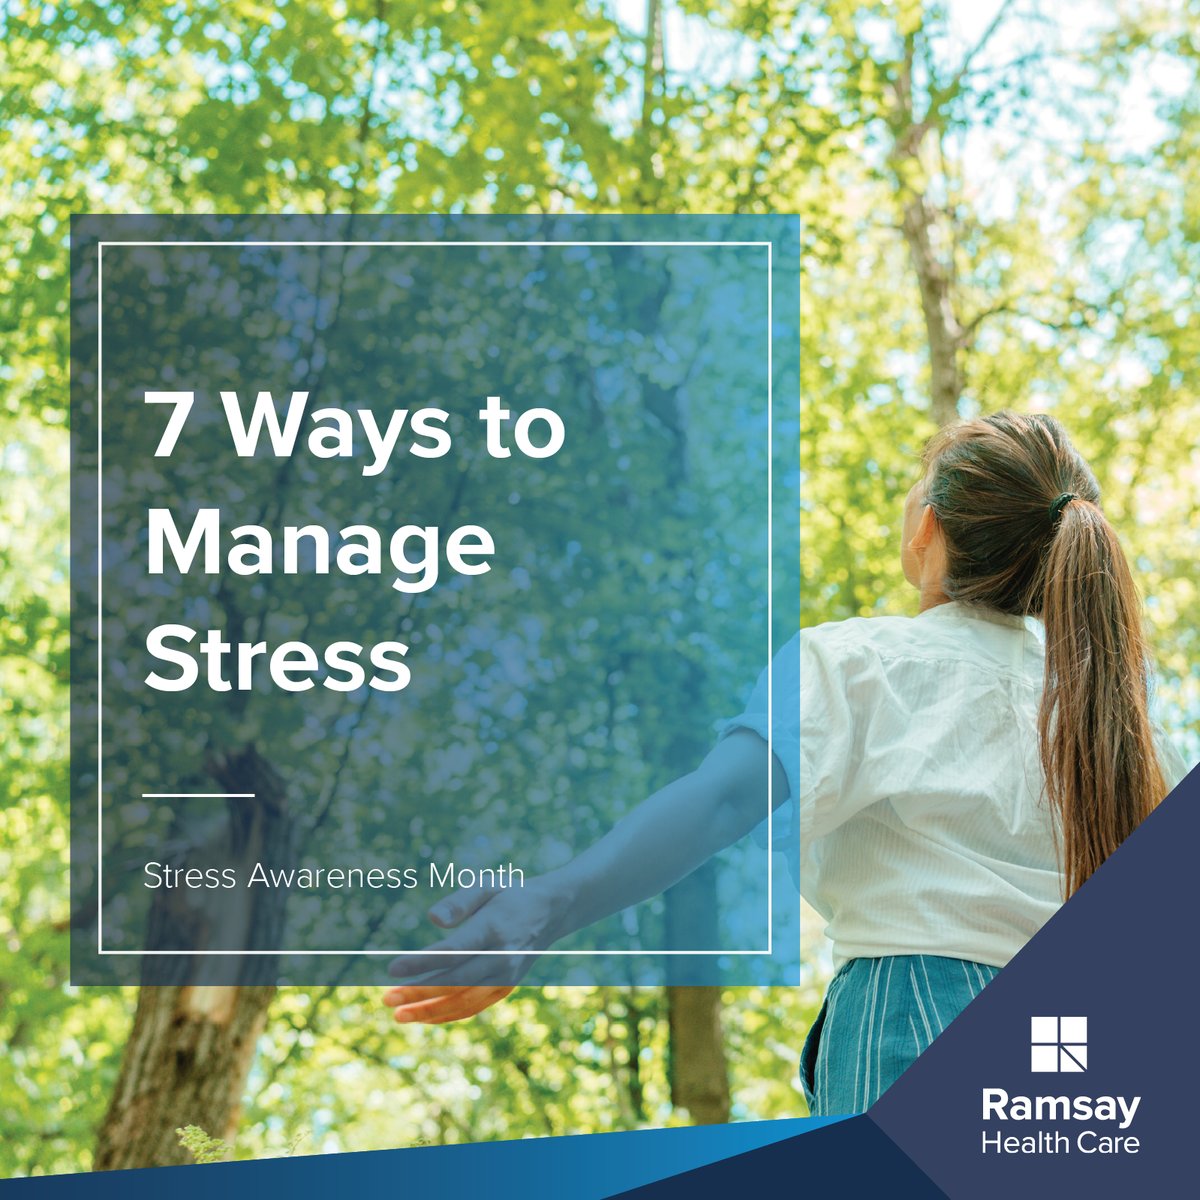 Most of us are exposed to stress at one time or another in our lives, but when you’re feeling overwhelmed it’s good to have a few methods to help manage and control it. To mark #StressAwarenessMonth, we’ve put together seven tips for managing stress: ow.ly/g03e50R8nkb